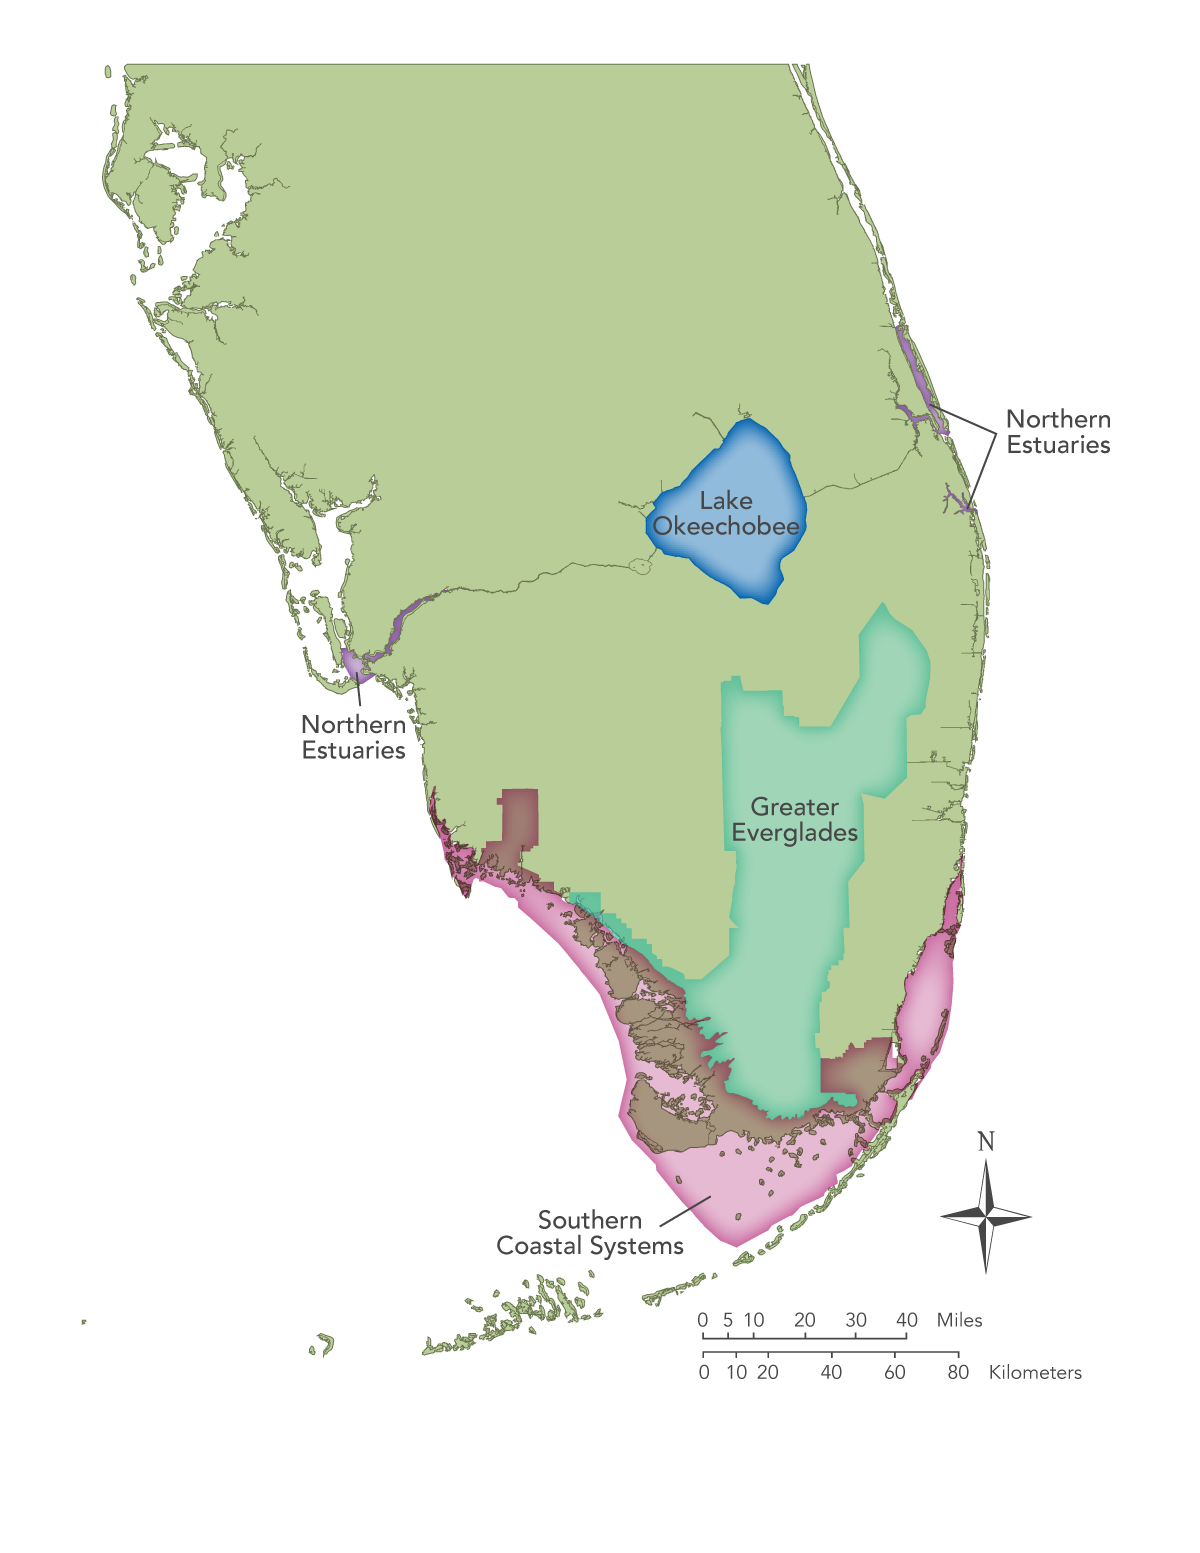 Map of Central and Southern Florida showing the four major regions making up the Everglades system. Regions are linked to their location on the may to take the user to the report card section. The regions include Lake Okeechobee, the Northern Estuaries, Greater Everglades, and Southern Coastal Systems.